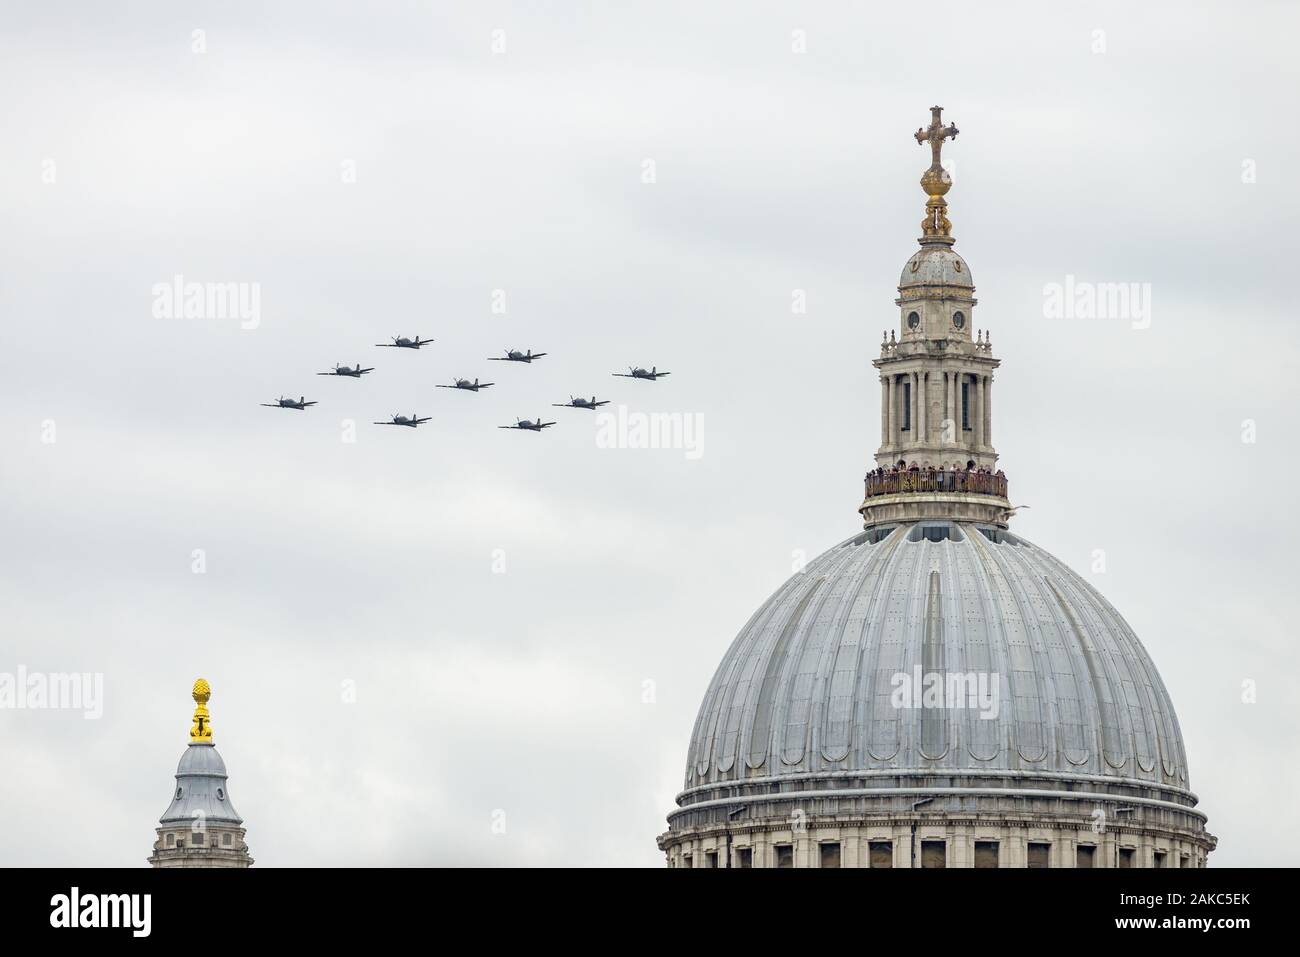 RAF Tucanos in display formation flying over St. Pauls cathedral on the RAF 100th anniversary, London, UK Stock Photo